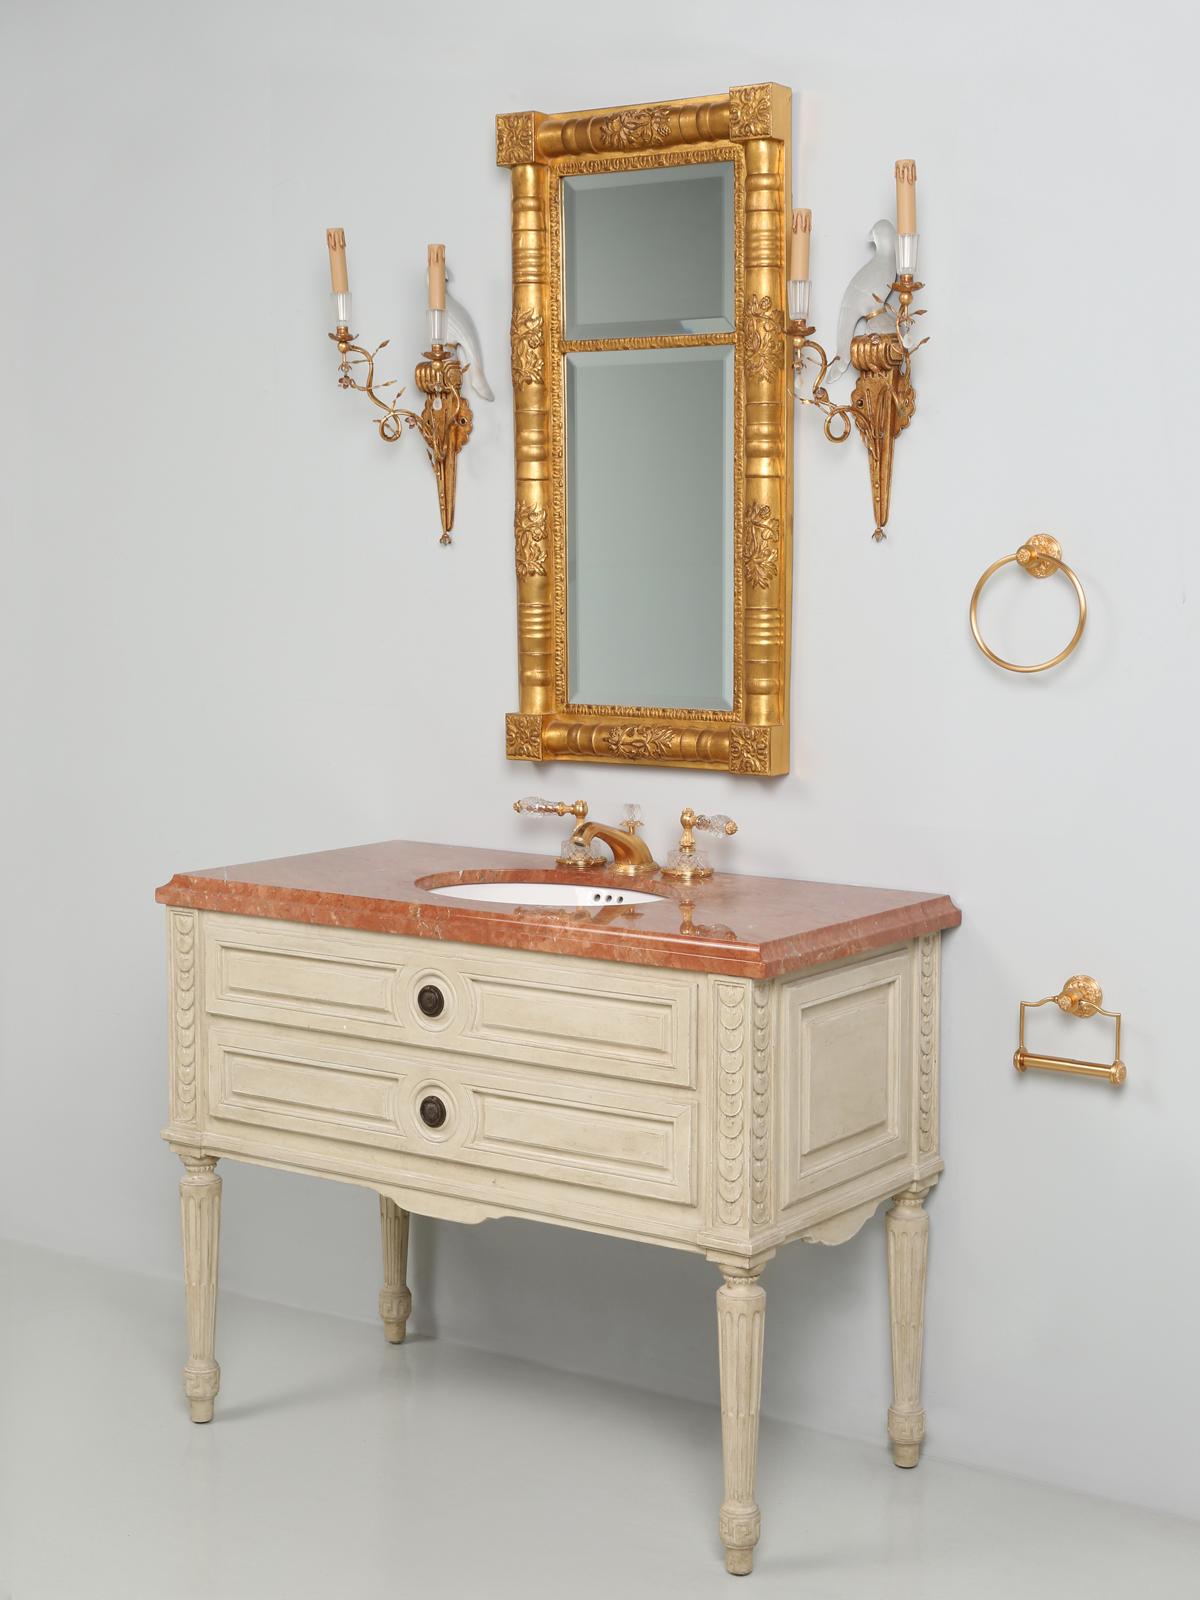 French Louis XVI style Bathroom Vanity from Sherle Wagner with all the accessories. The Sherle Wagner bathroom set includes the Louis XVI style painted vanity, with the white ceramic under edge sink accented with acanthus burnished gold, the famous